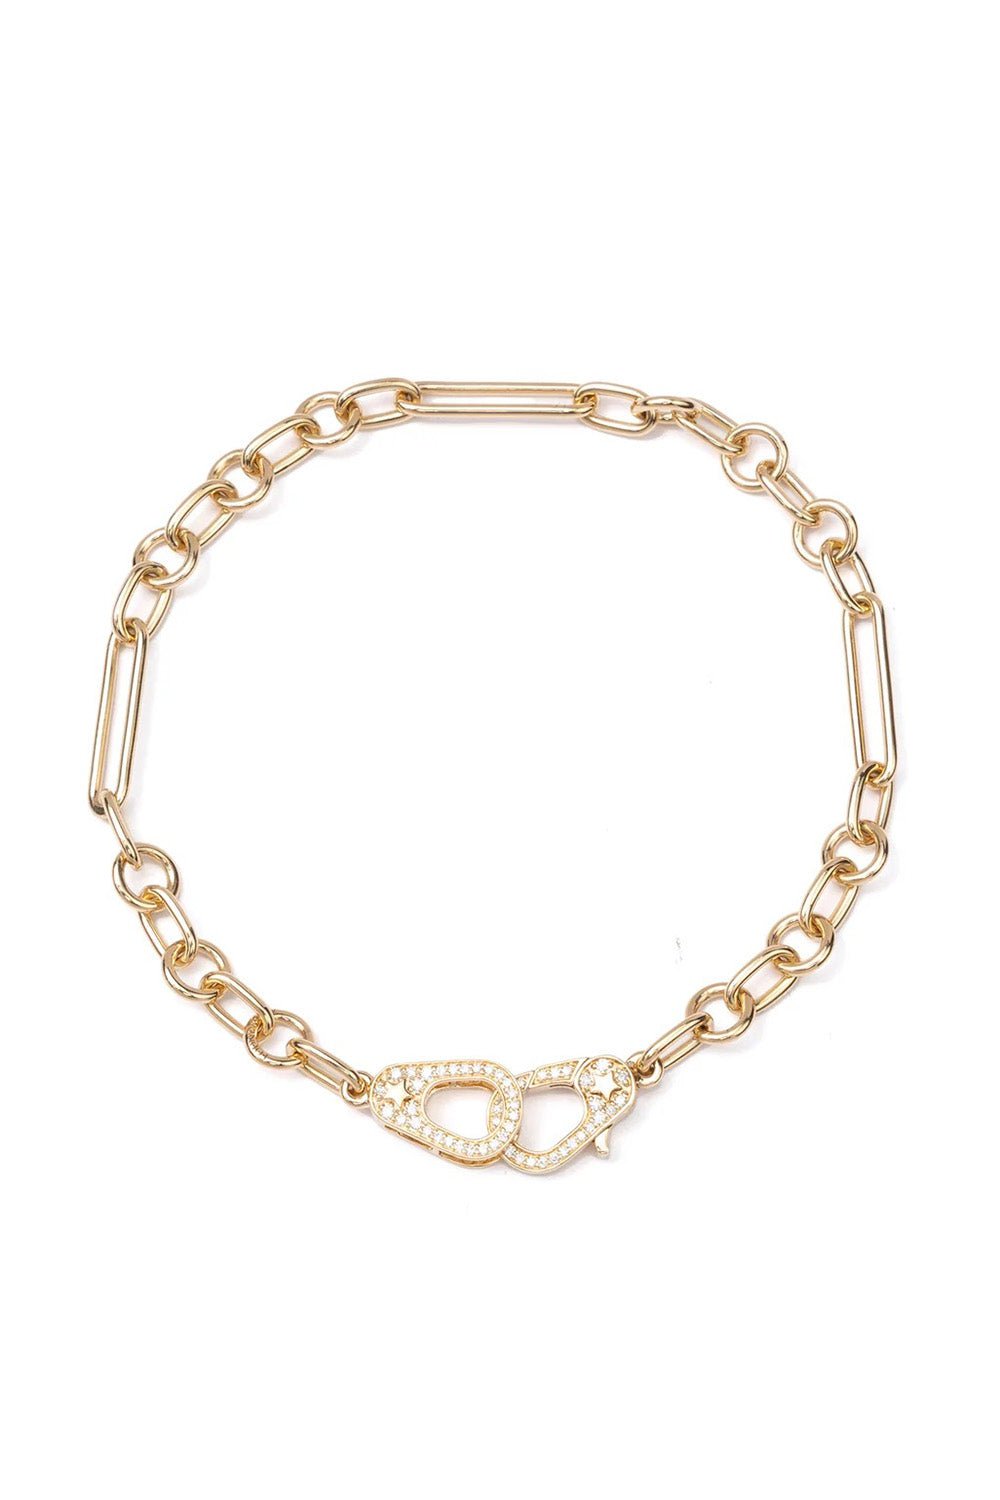 FOUNDRAE-Small Mixed Clip Bracelet-YELLOW GOLD